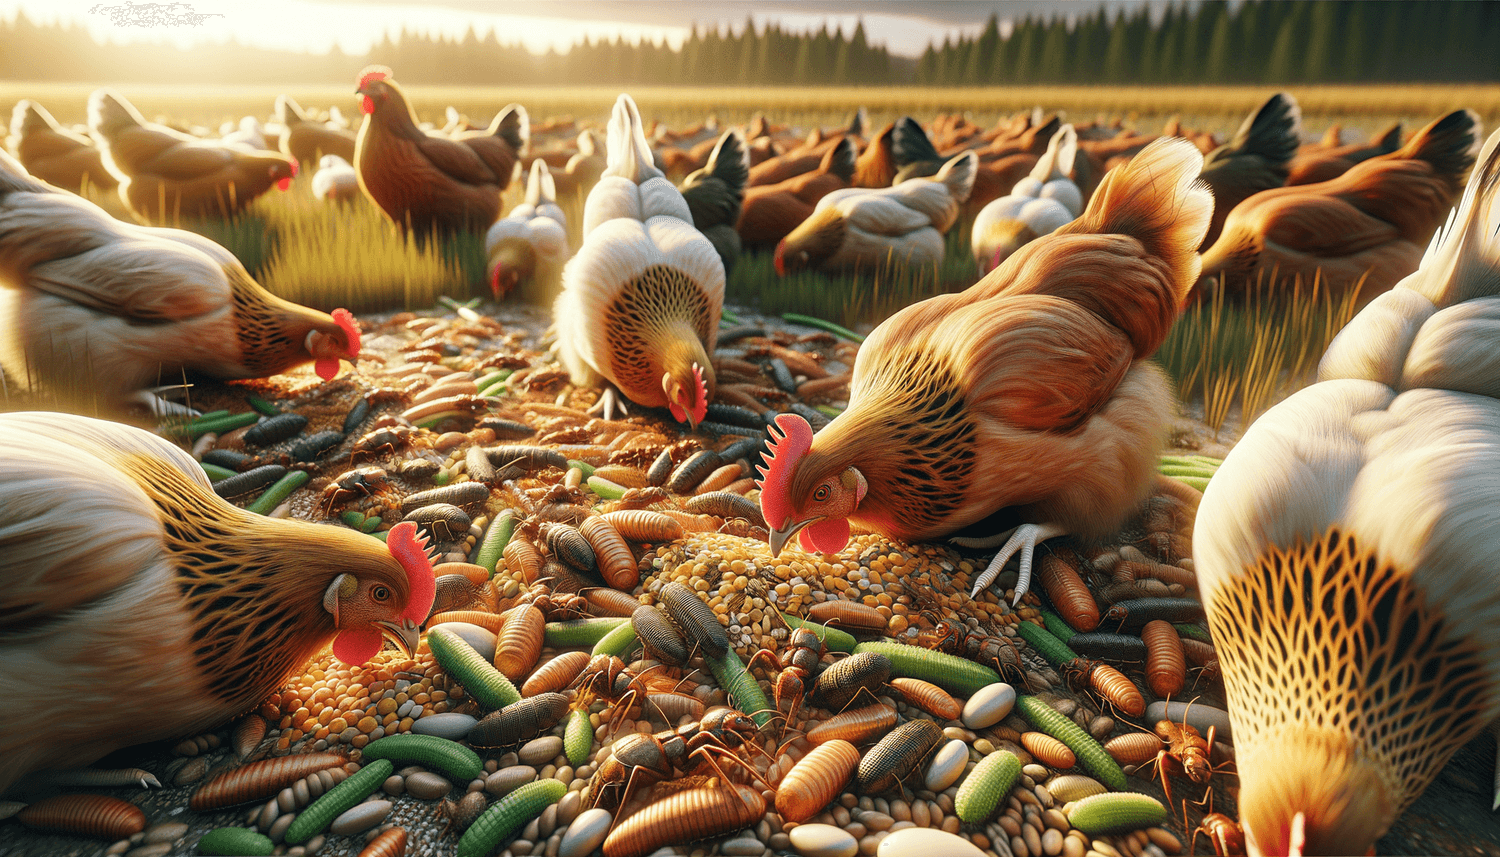 Can Chickens Eat Too Much Protein?